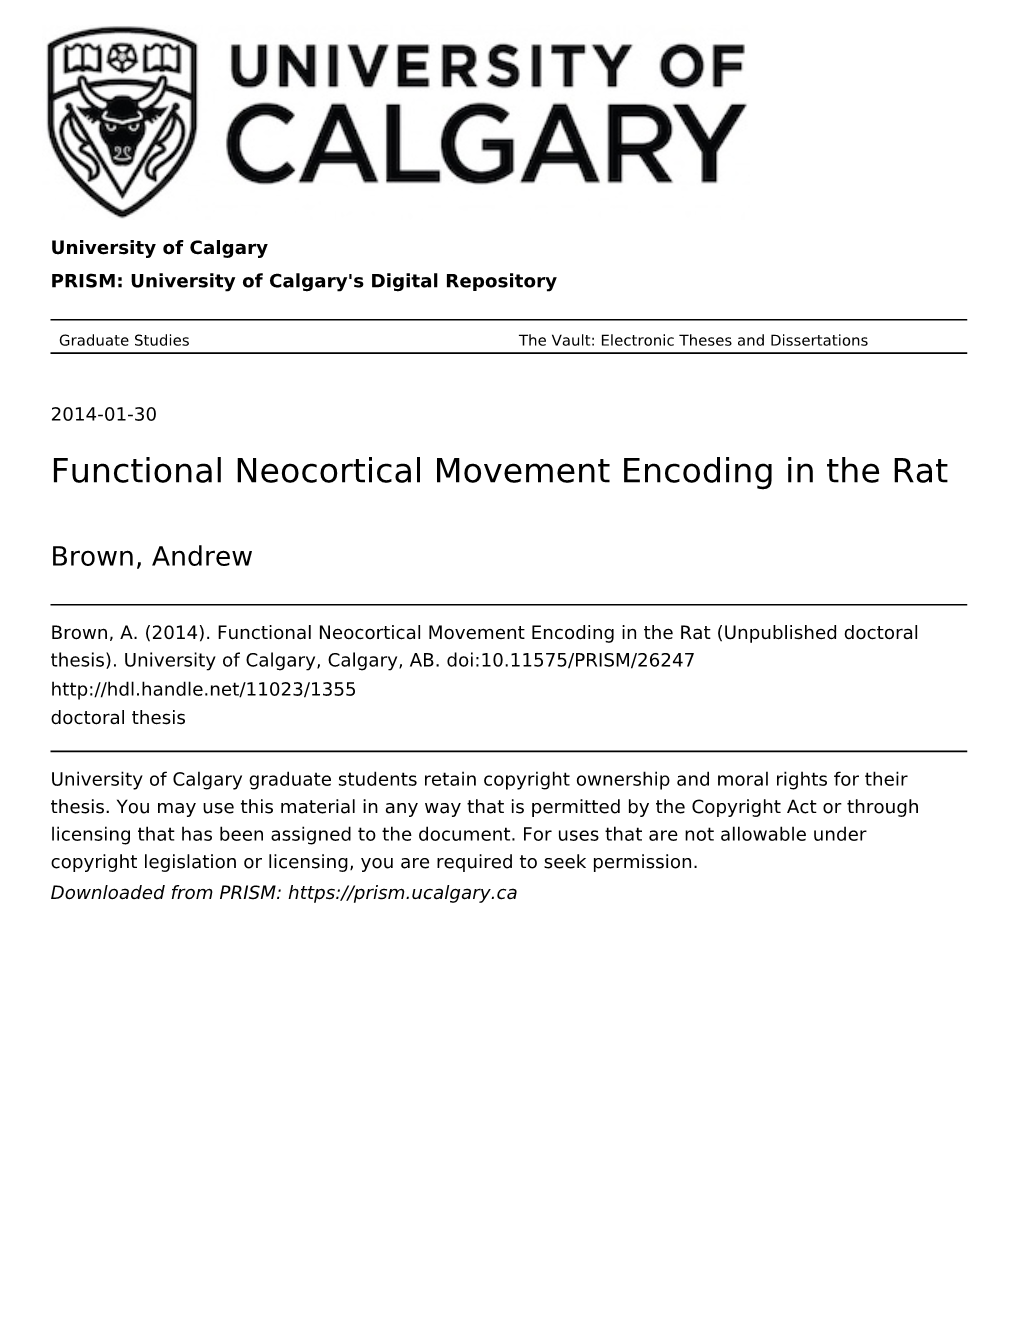 Functional Neocortical Movement Encoding in the Rat